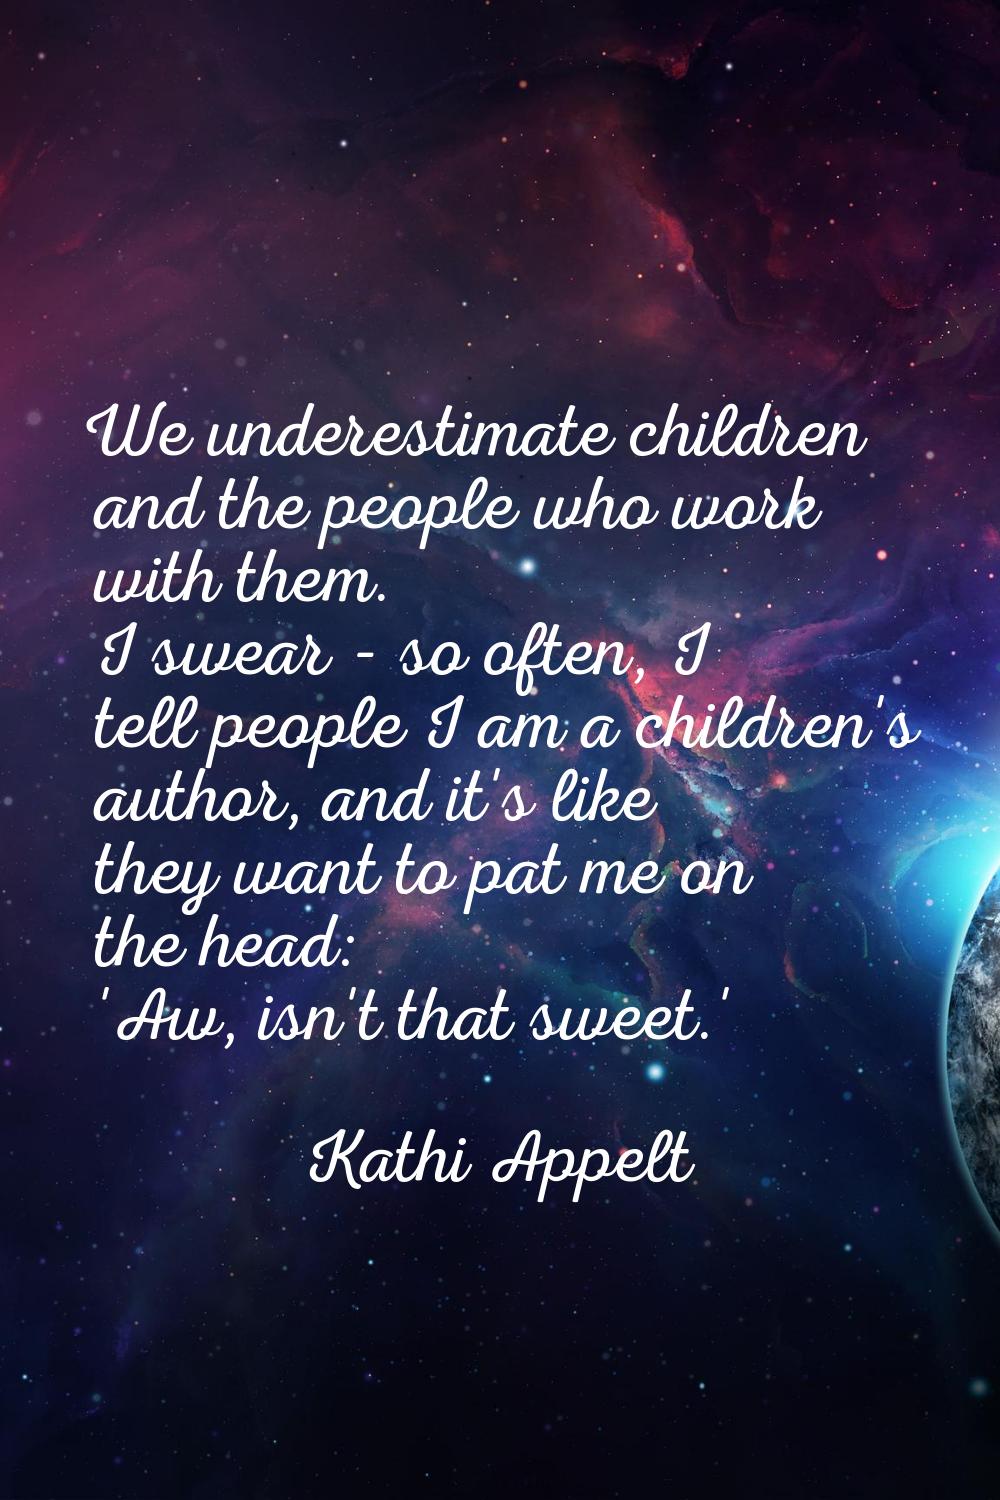 We underestimate children and the people who work with them. I swear - so often, I tell people I am